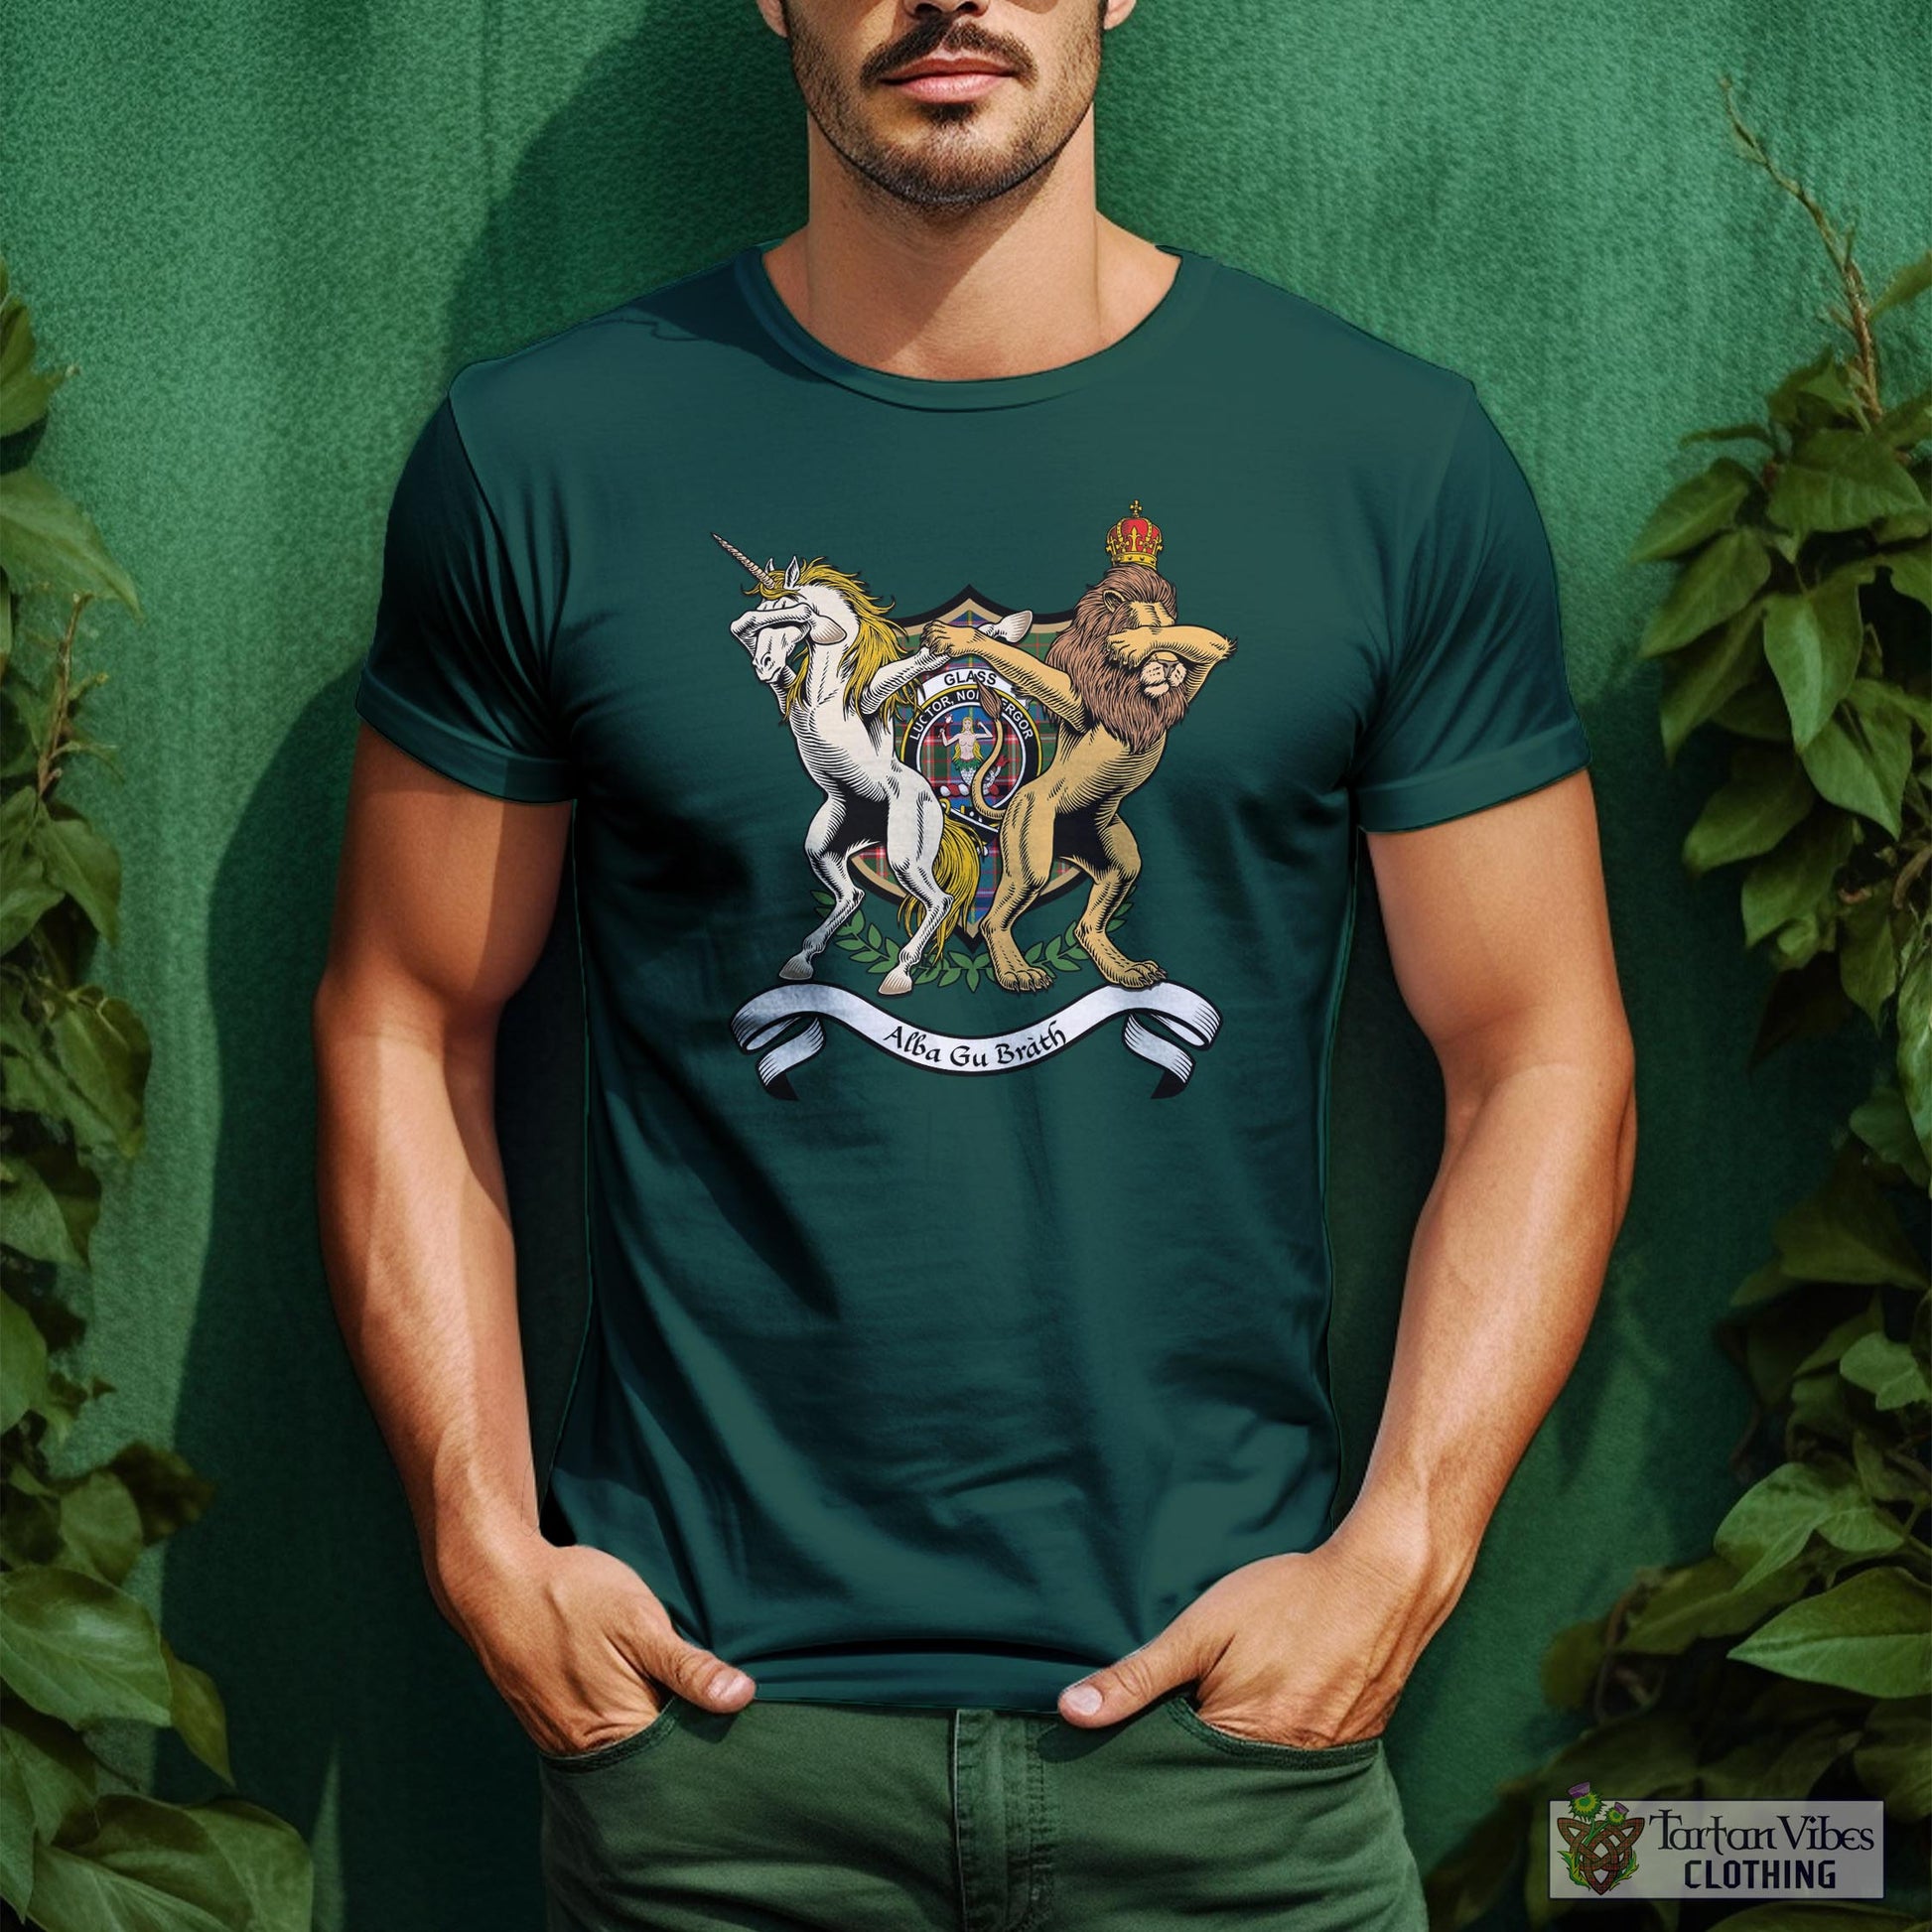 Tartan Vibes Clothing Glass Family Crest Cotton Men's T-Shirt with Scotland Royal Coat Of Arm Funny Style